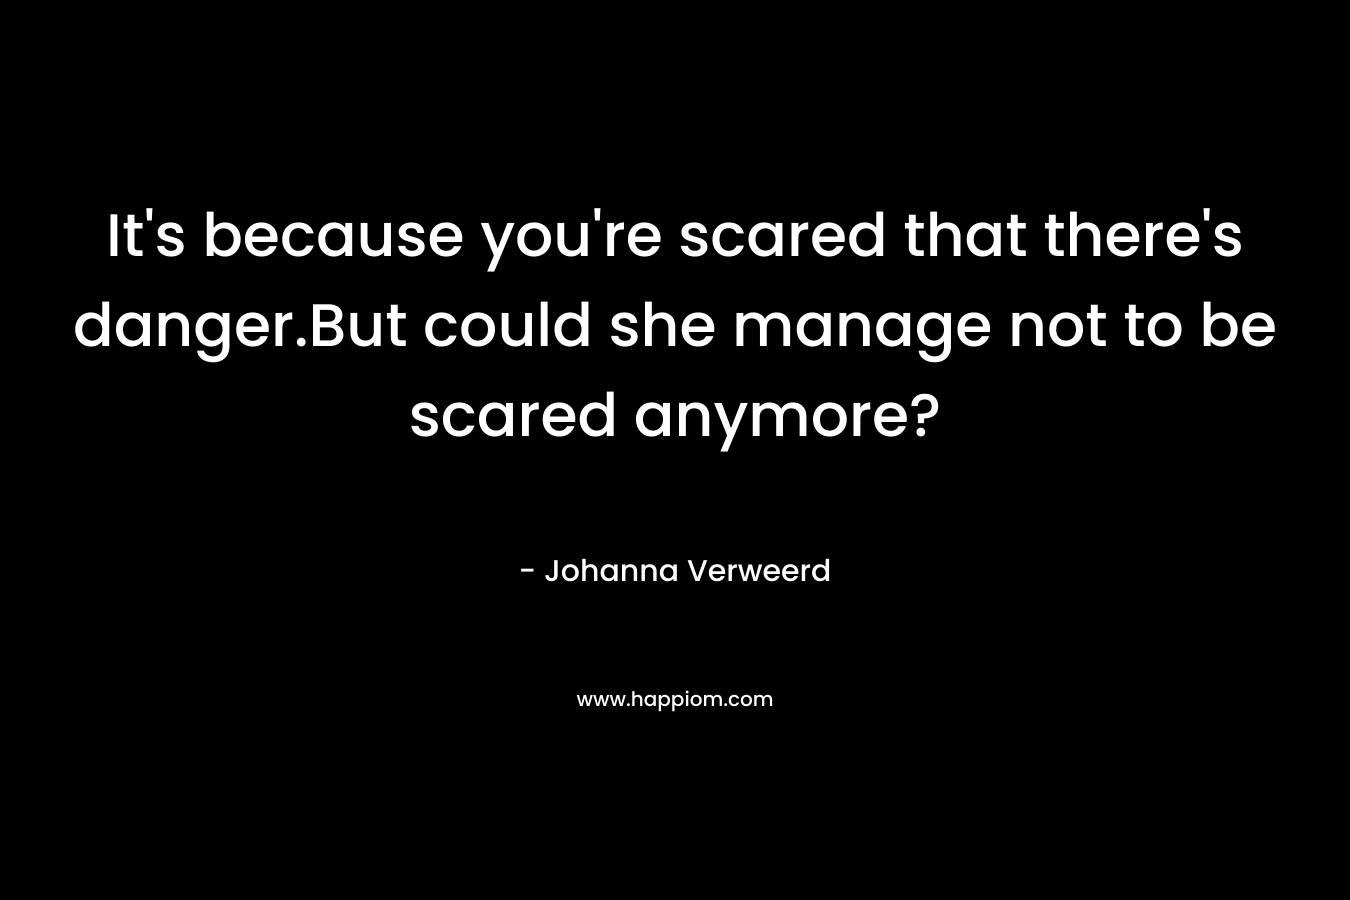 It's because you're scared that there's danger.But could she manage not to be scared anymore?